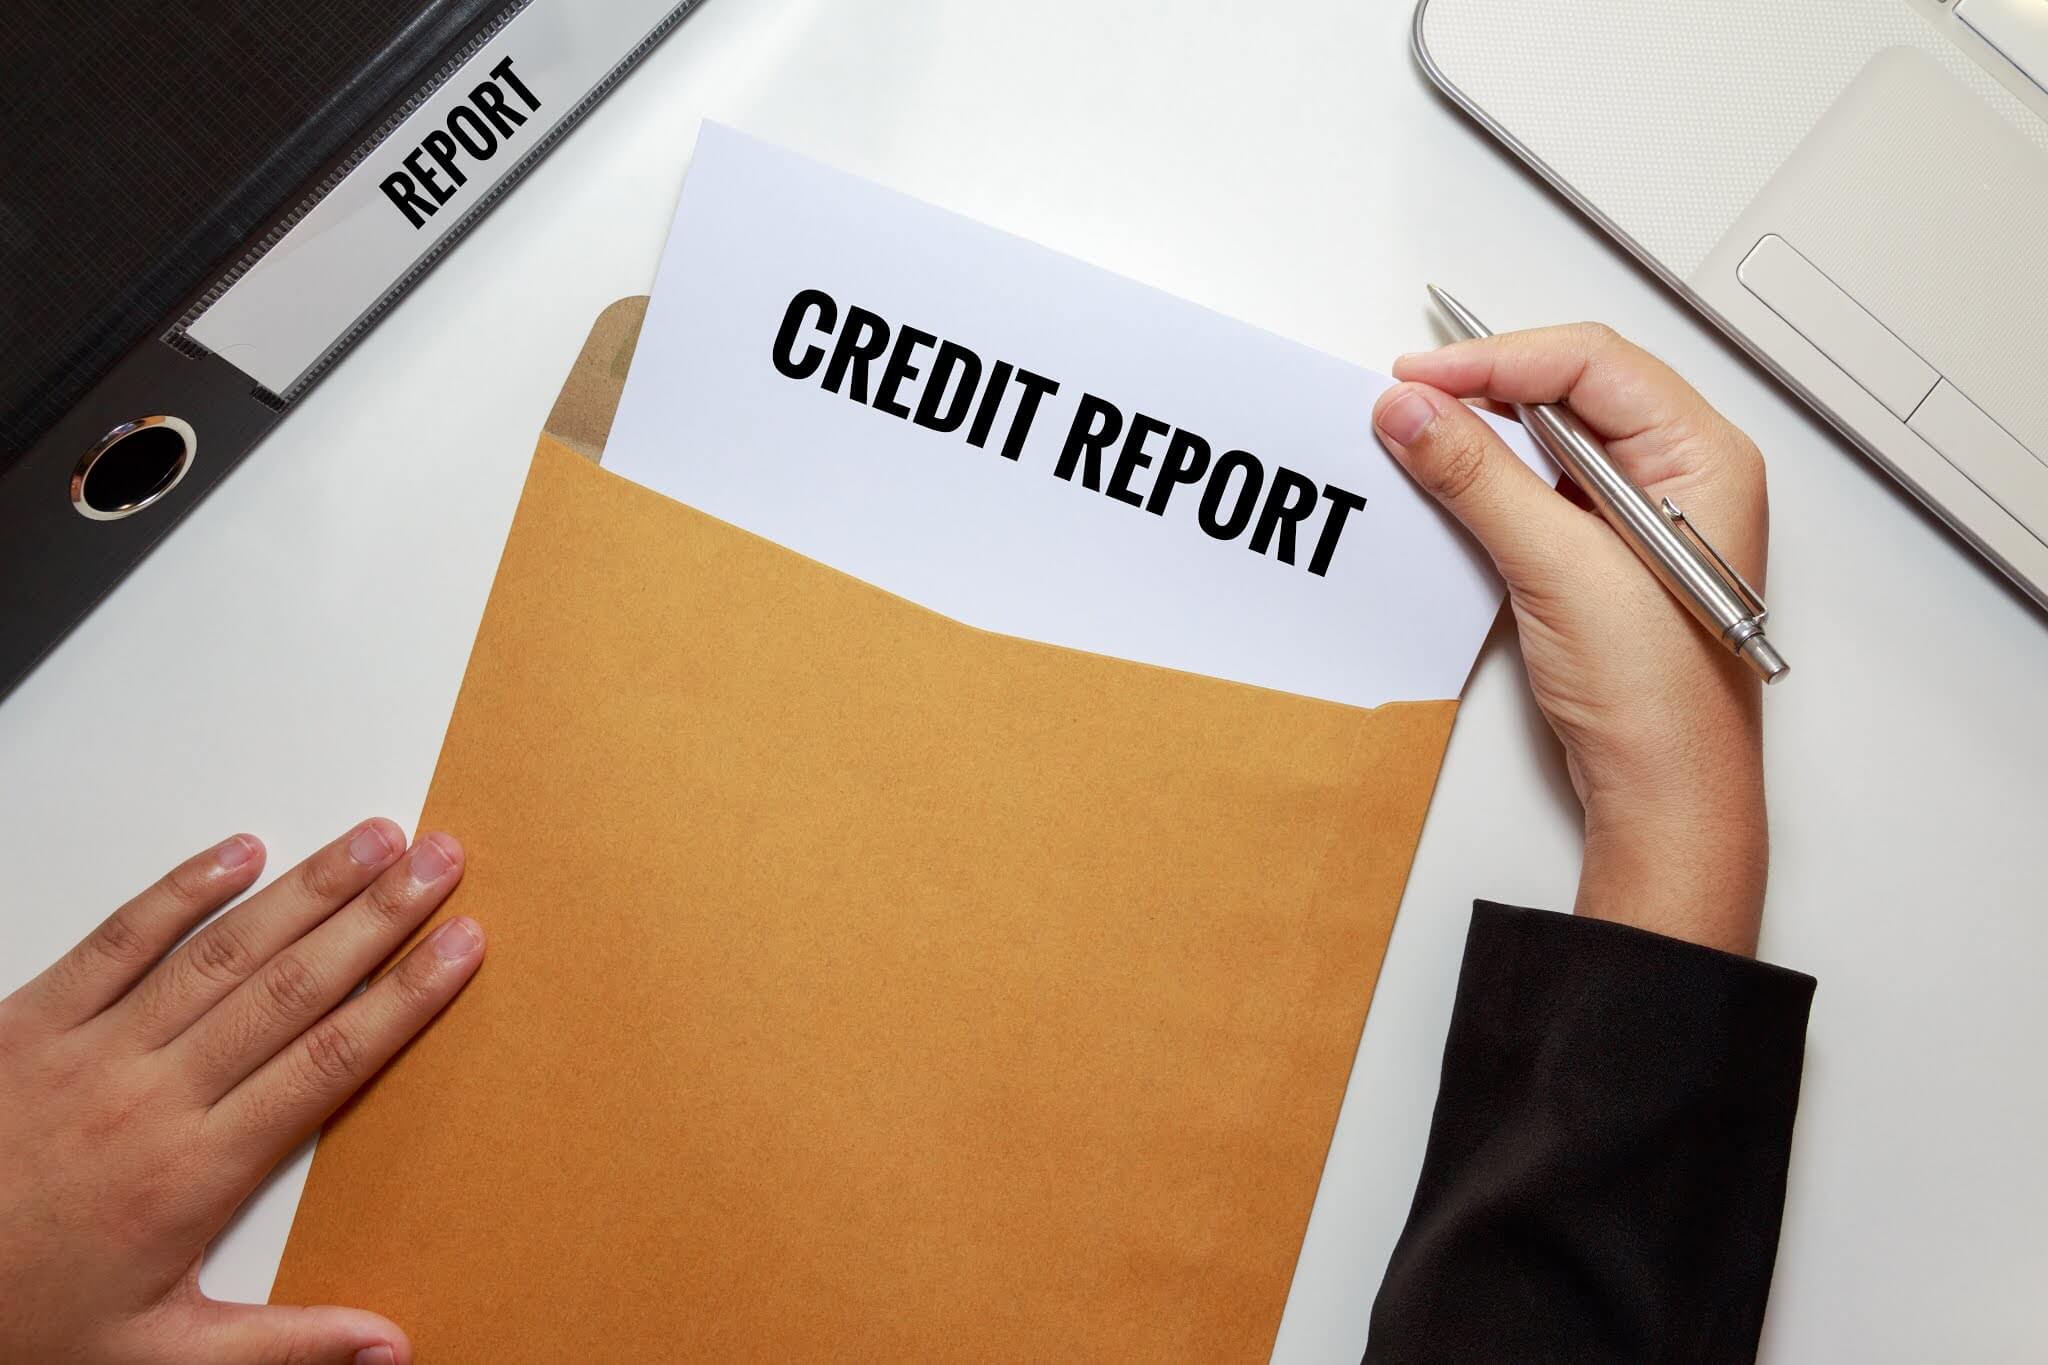 New Credit Reporting Law Here To Help Or Hinder?